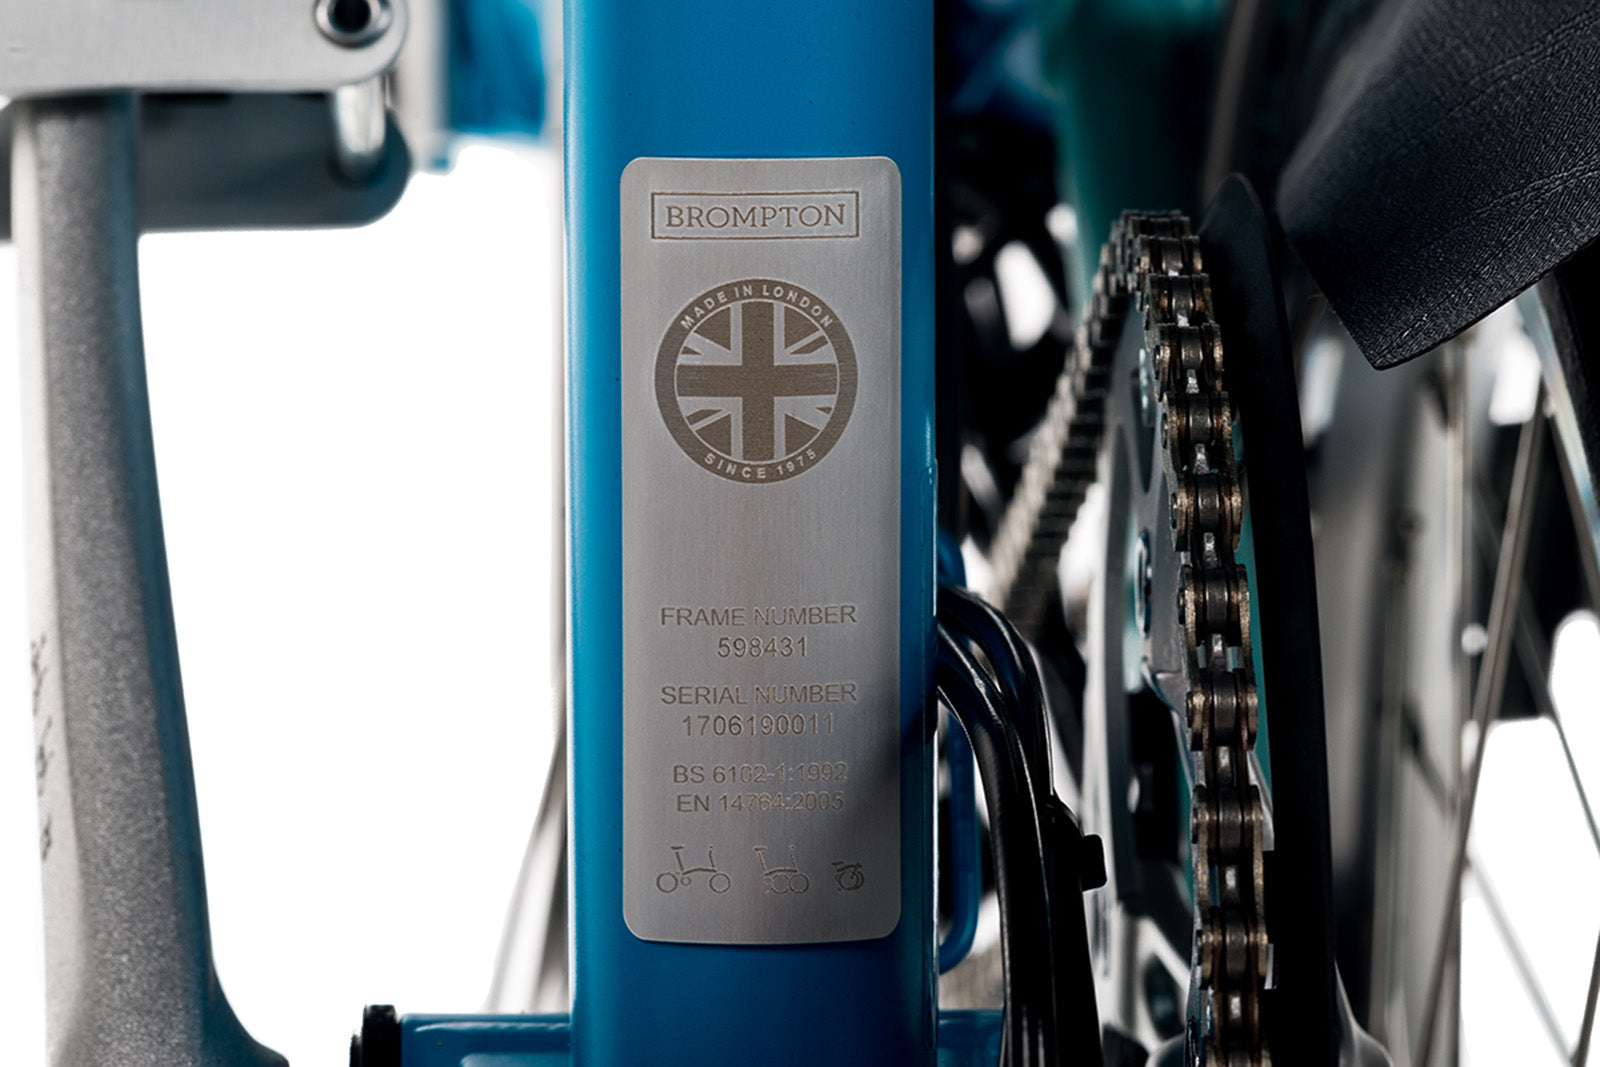 Brompton ID plate is found on the back of the seat tube